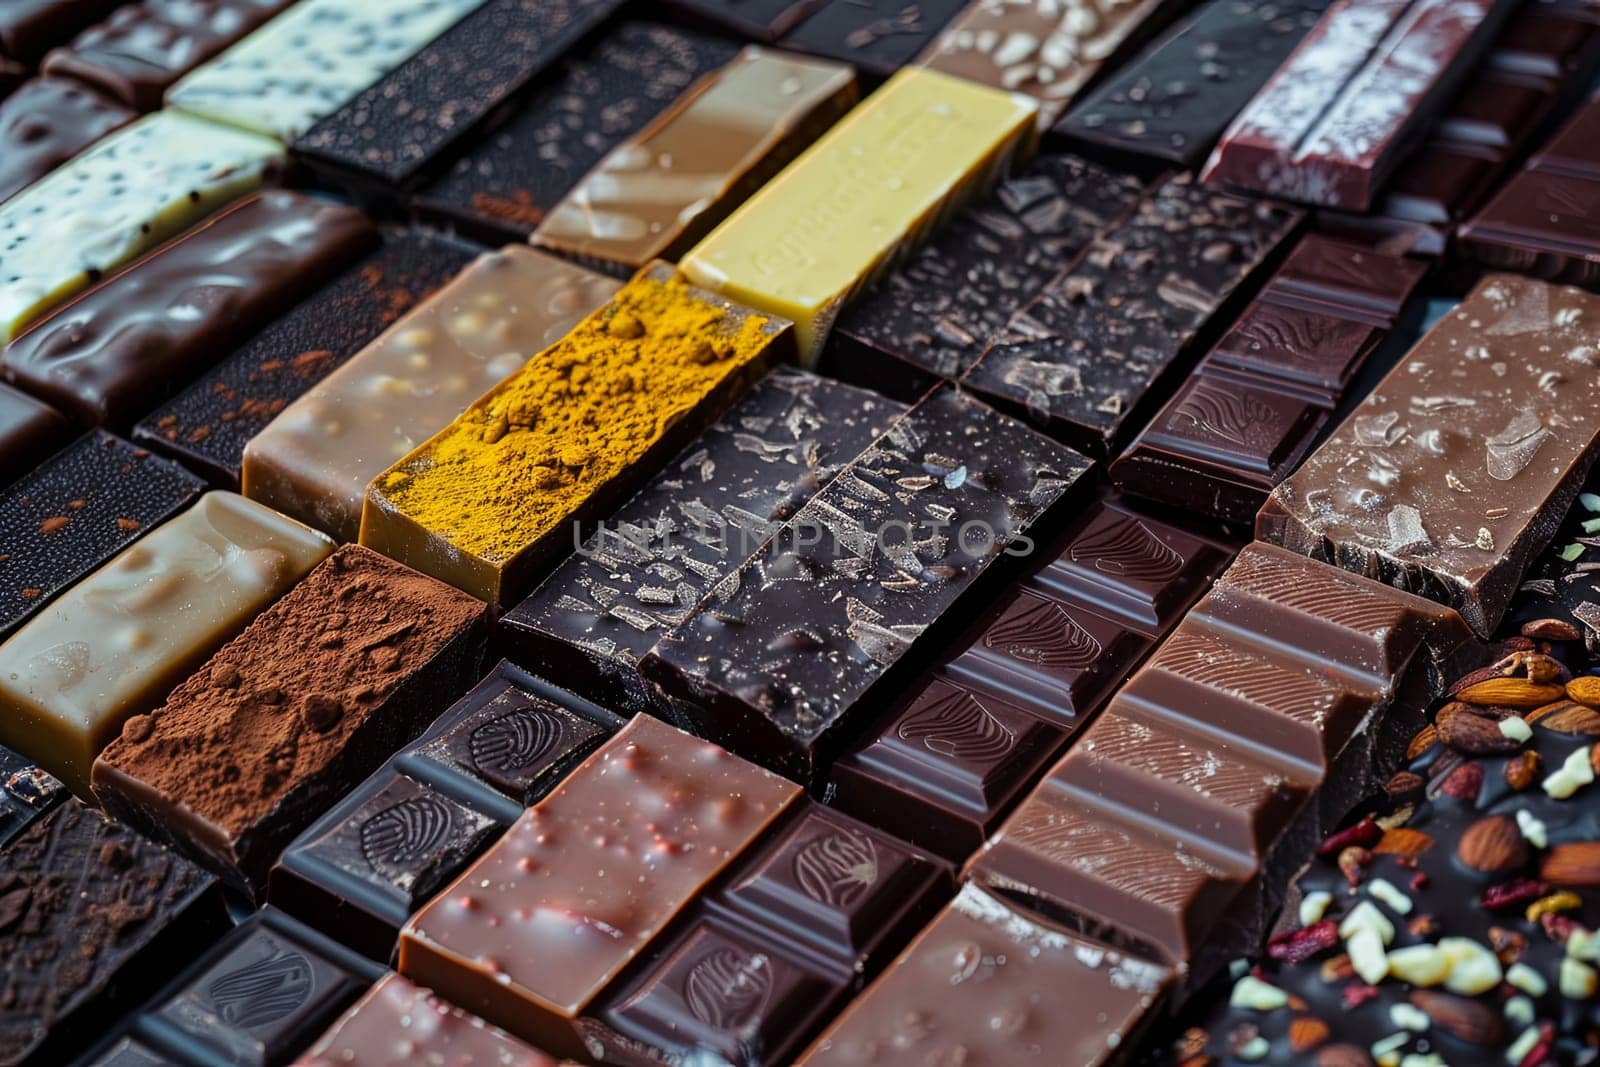 Various types of chocolate bars in different flavors neatly arranged on a table.